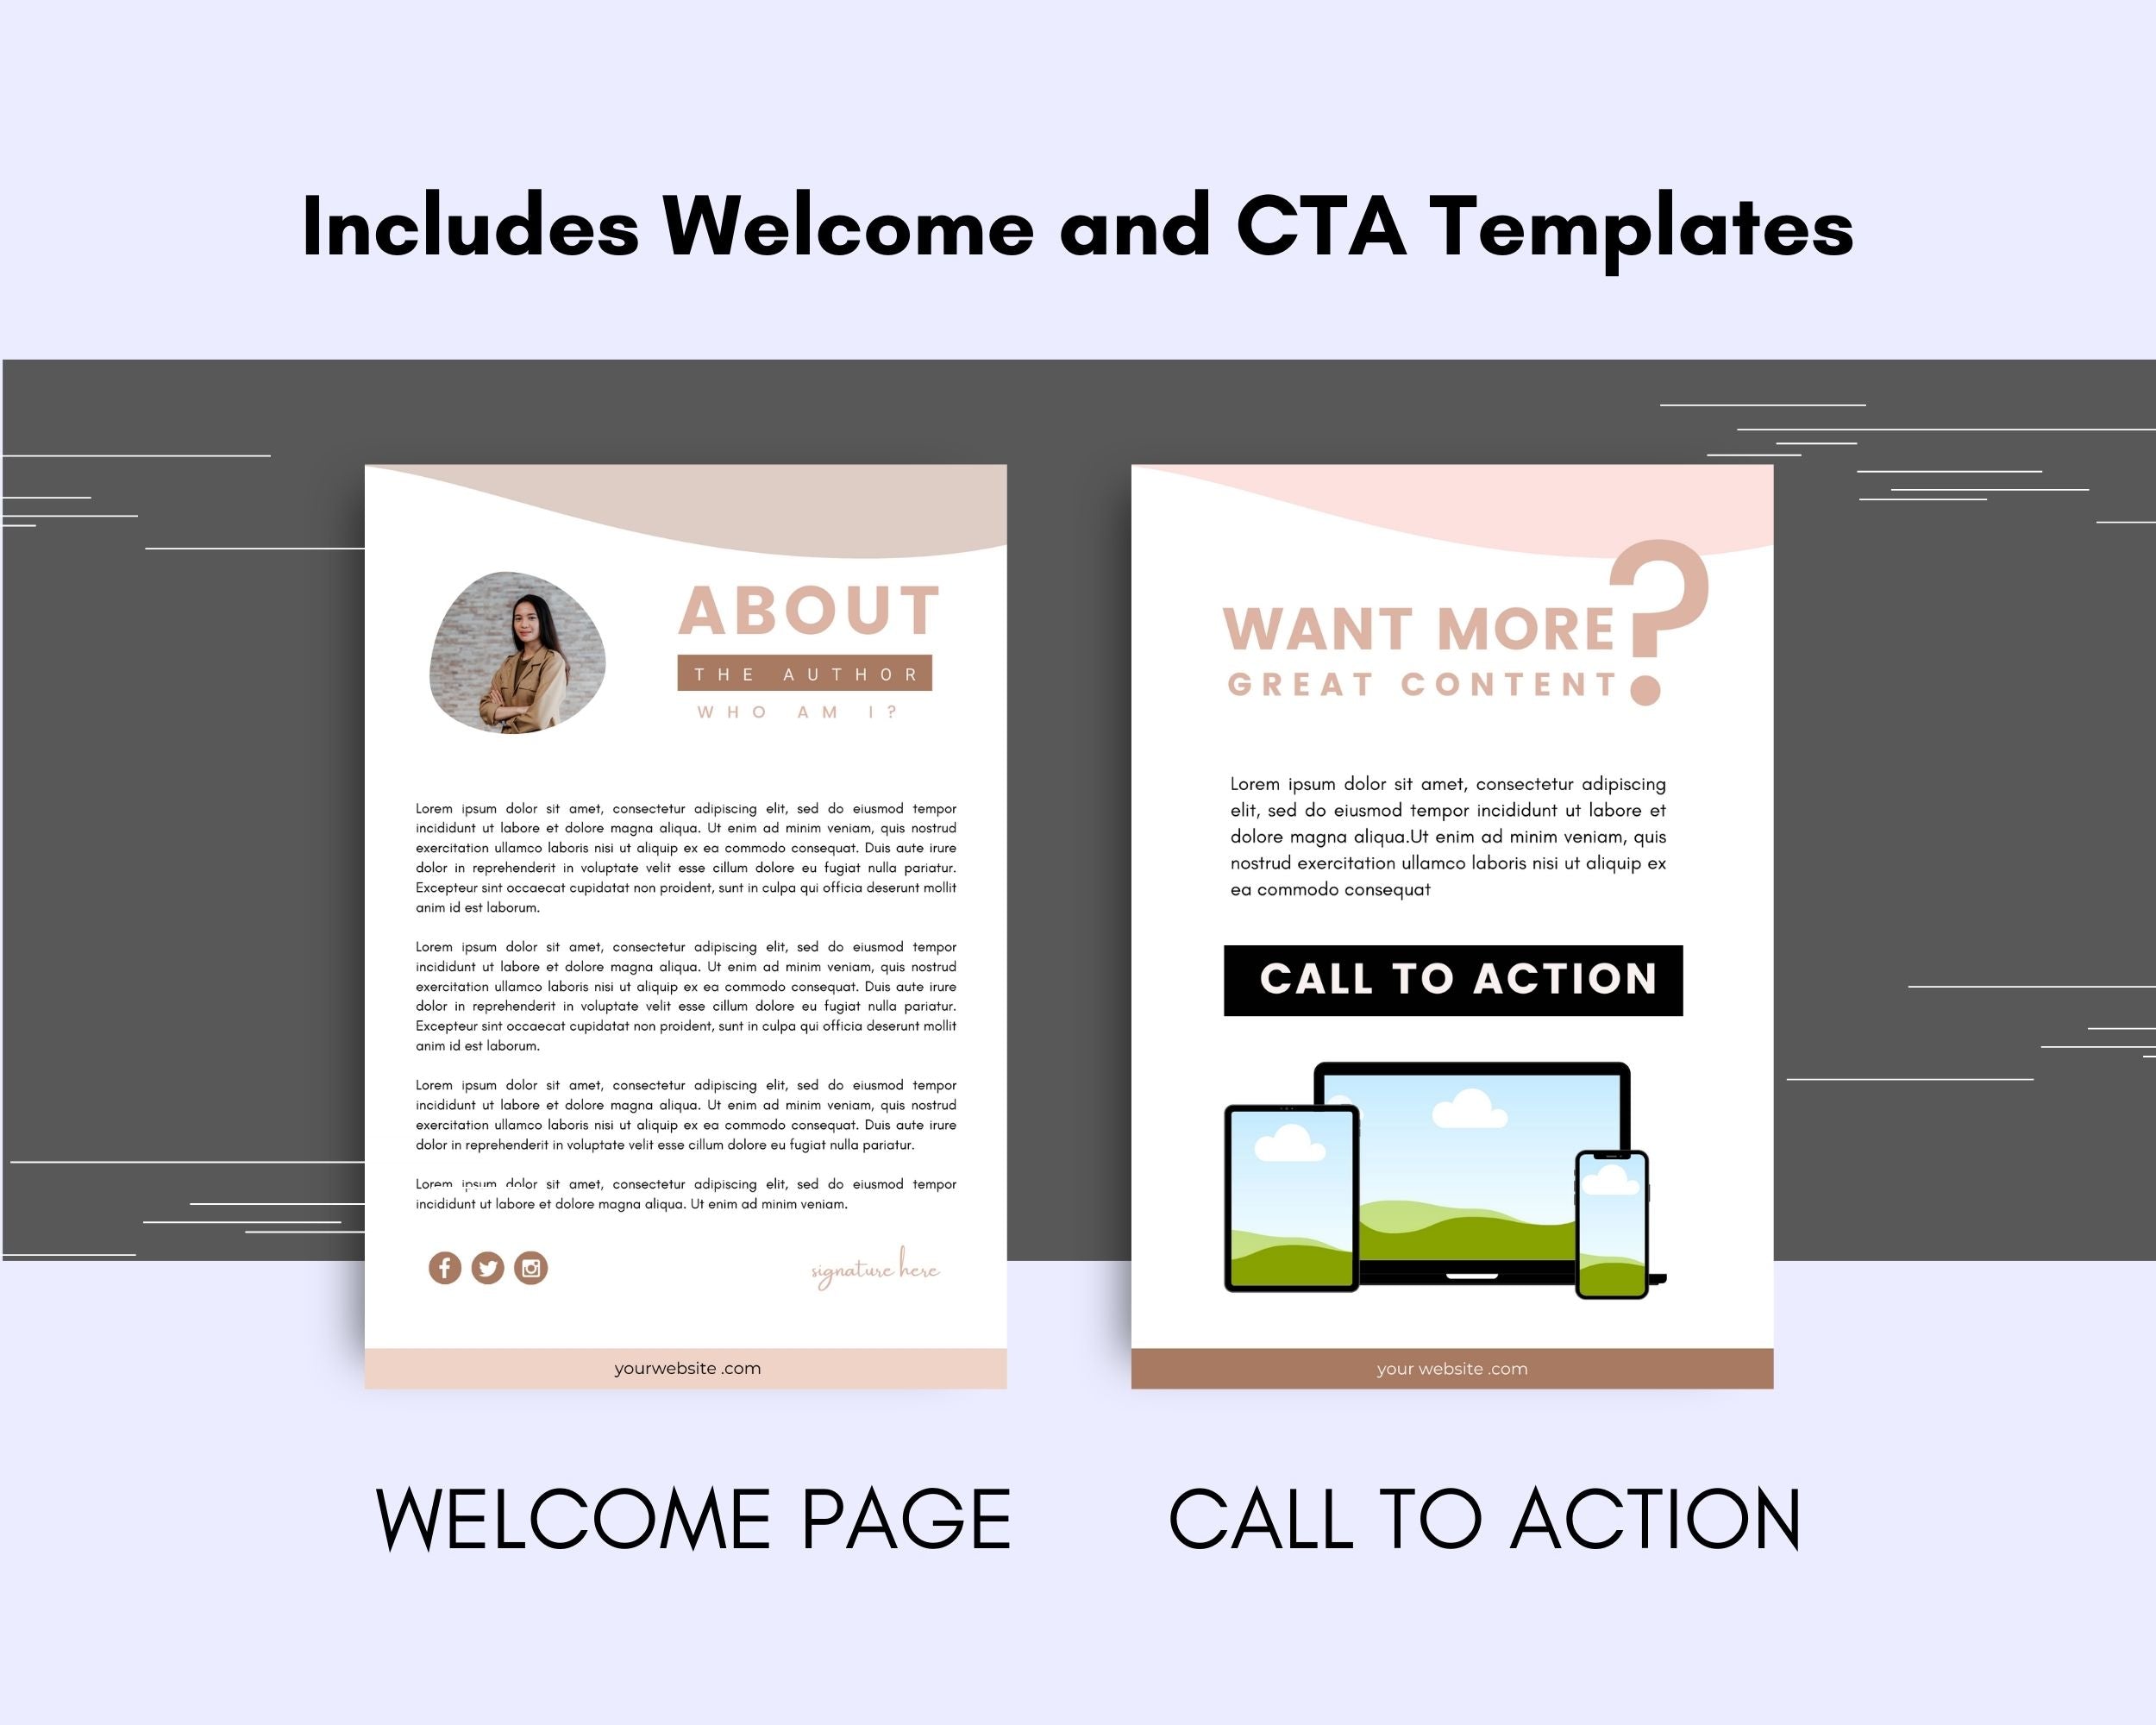 Editable Ultimate Hustle Ebook | Done-for-You Ebook in Canva | Rebrandable and Resizable Canva Template